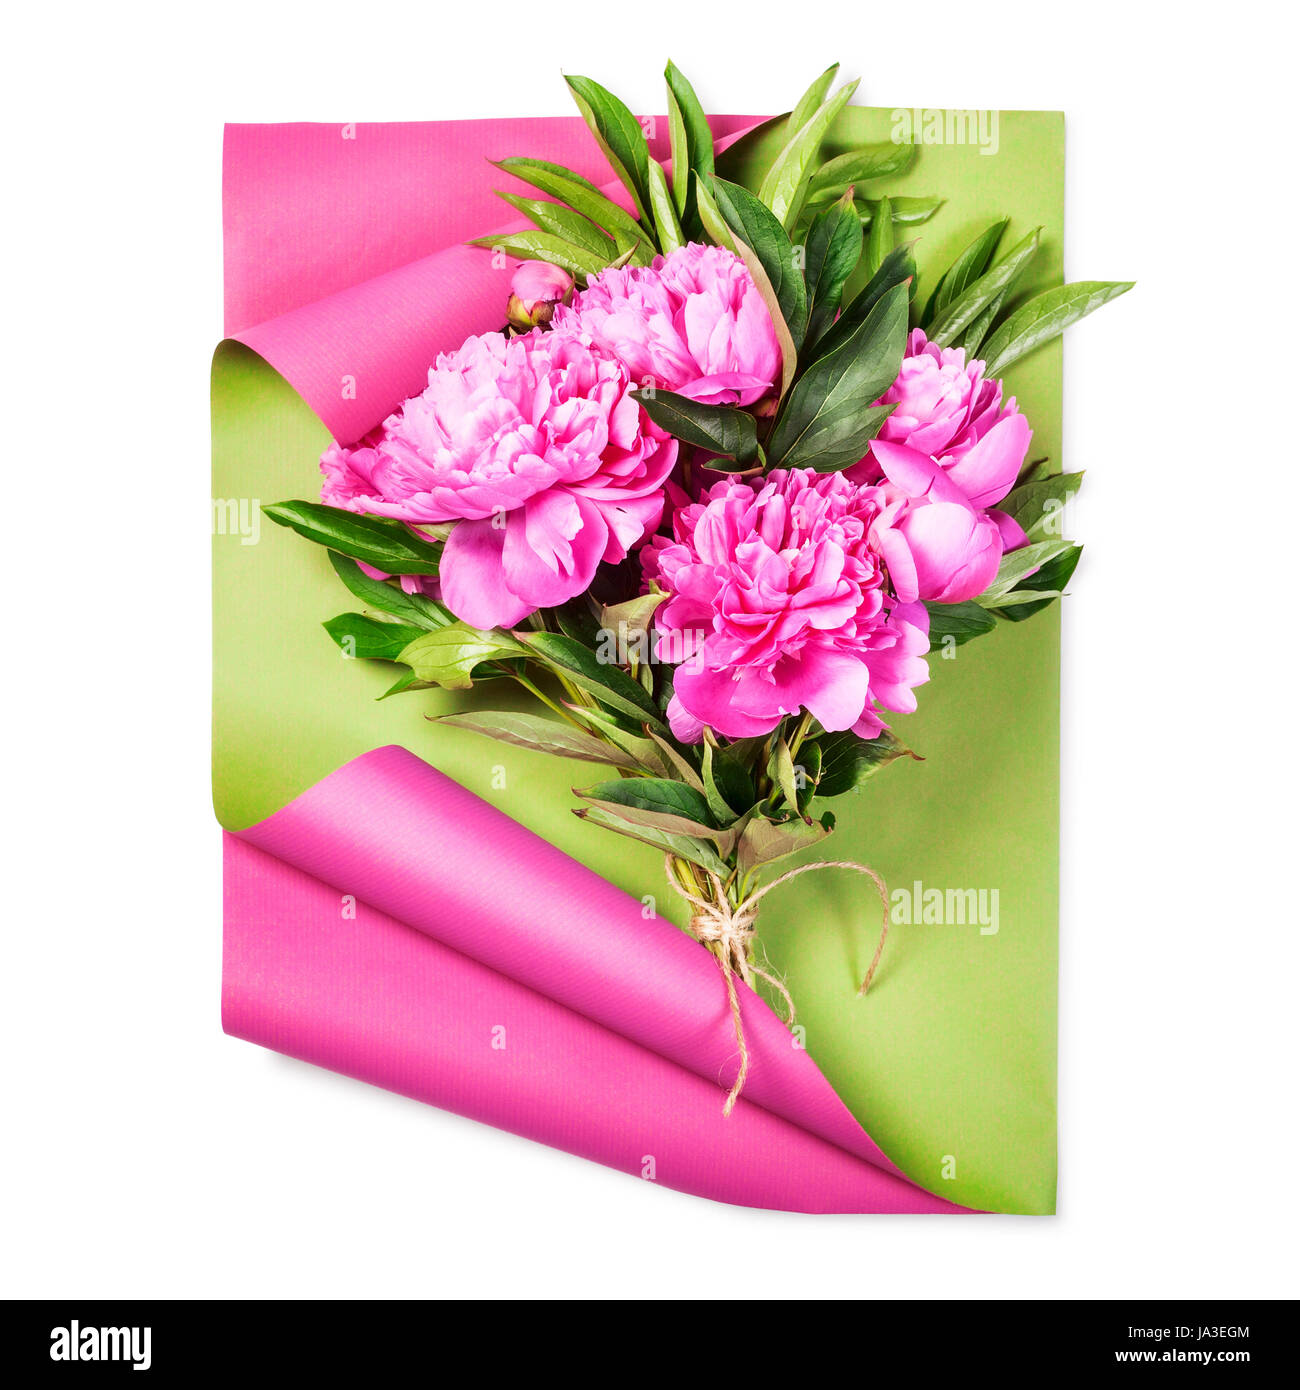 Pink peony flowers bouquet with wrapping craft paper. Objects group isolated on white background clipping path included. Flower arrangement Stock Photo